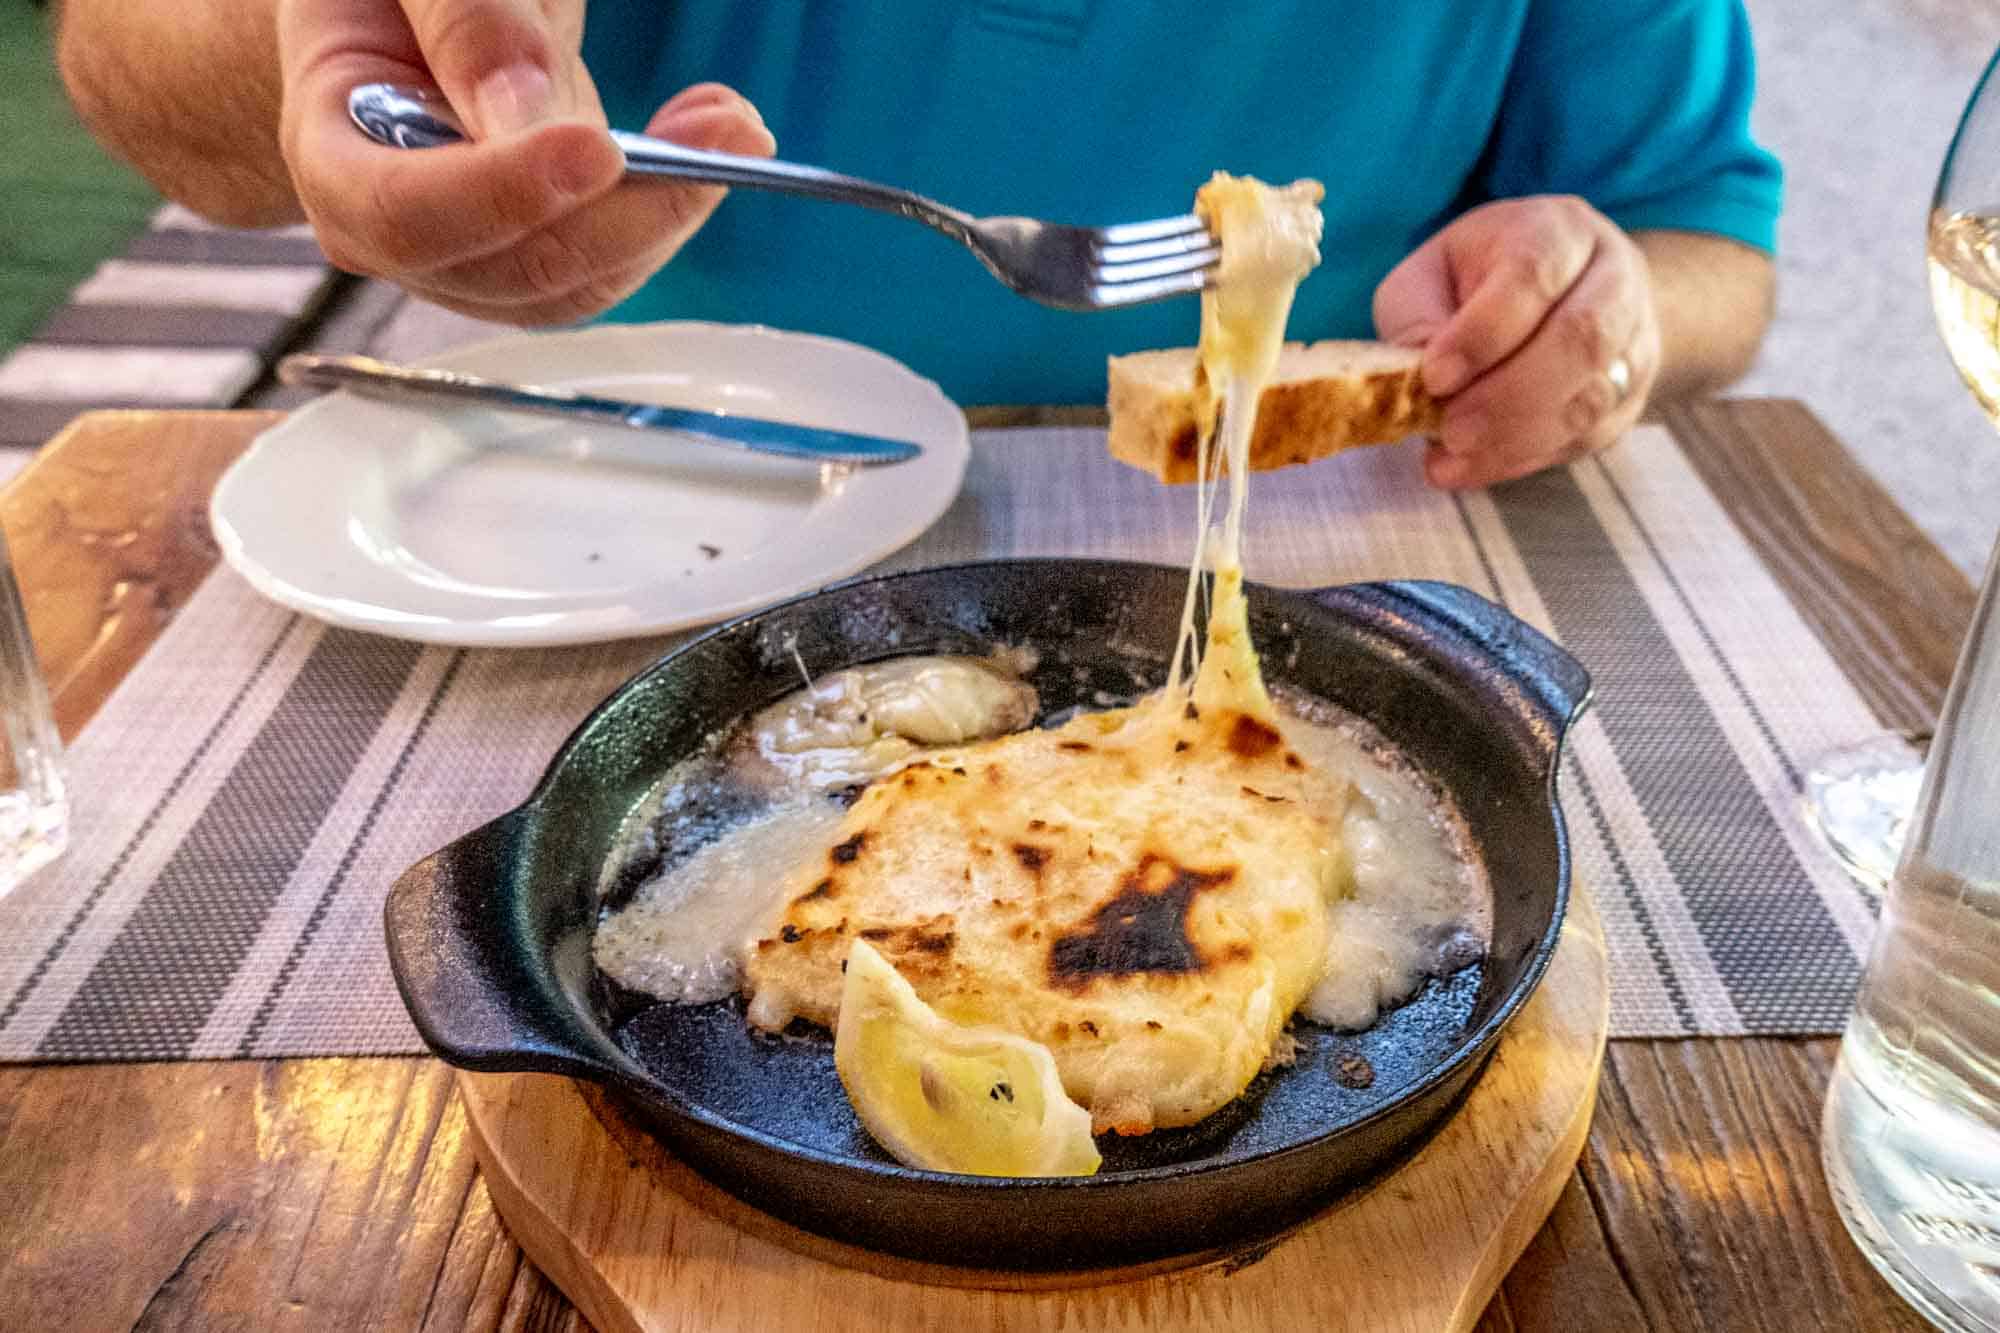 Gooey saganaki cheese being pulled out of cast iron dish